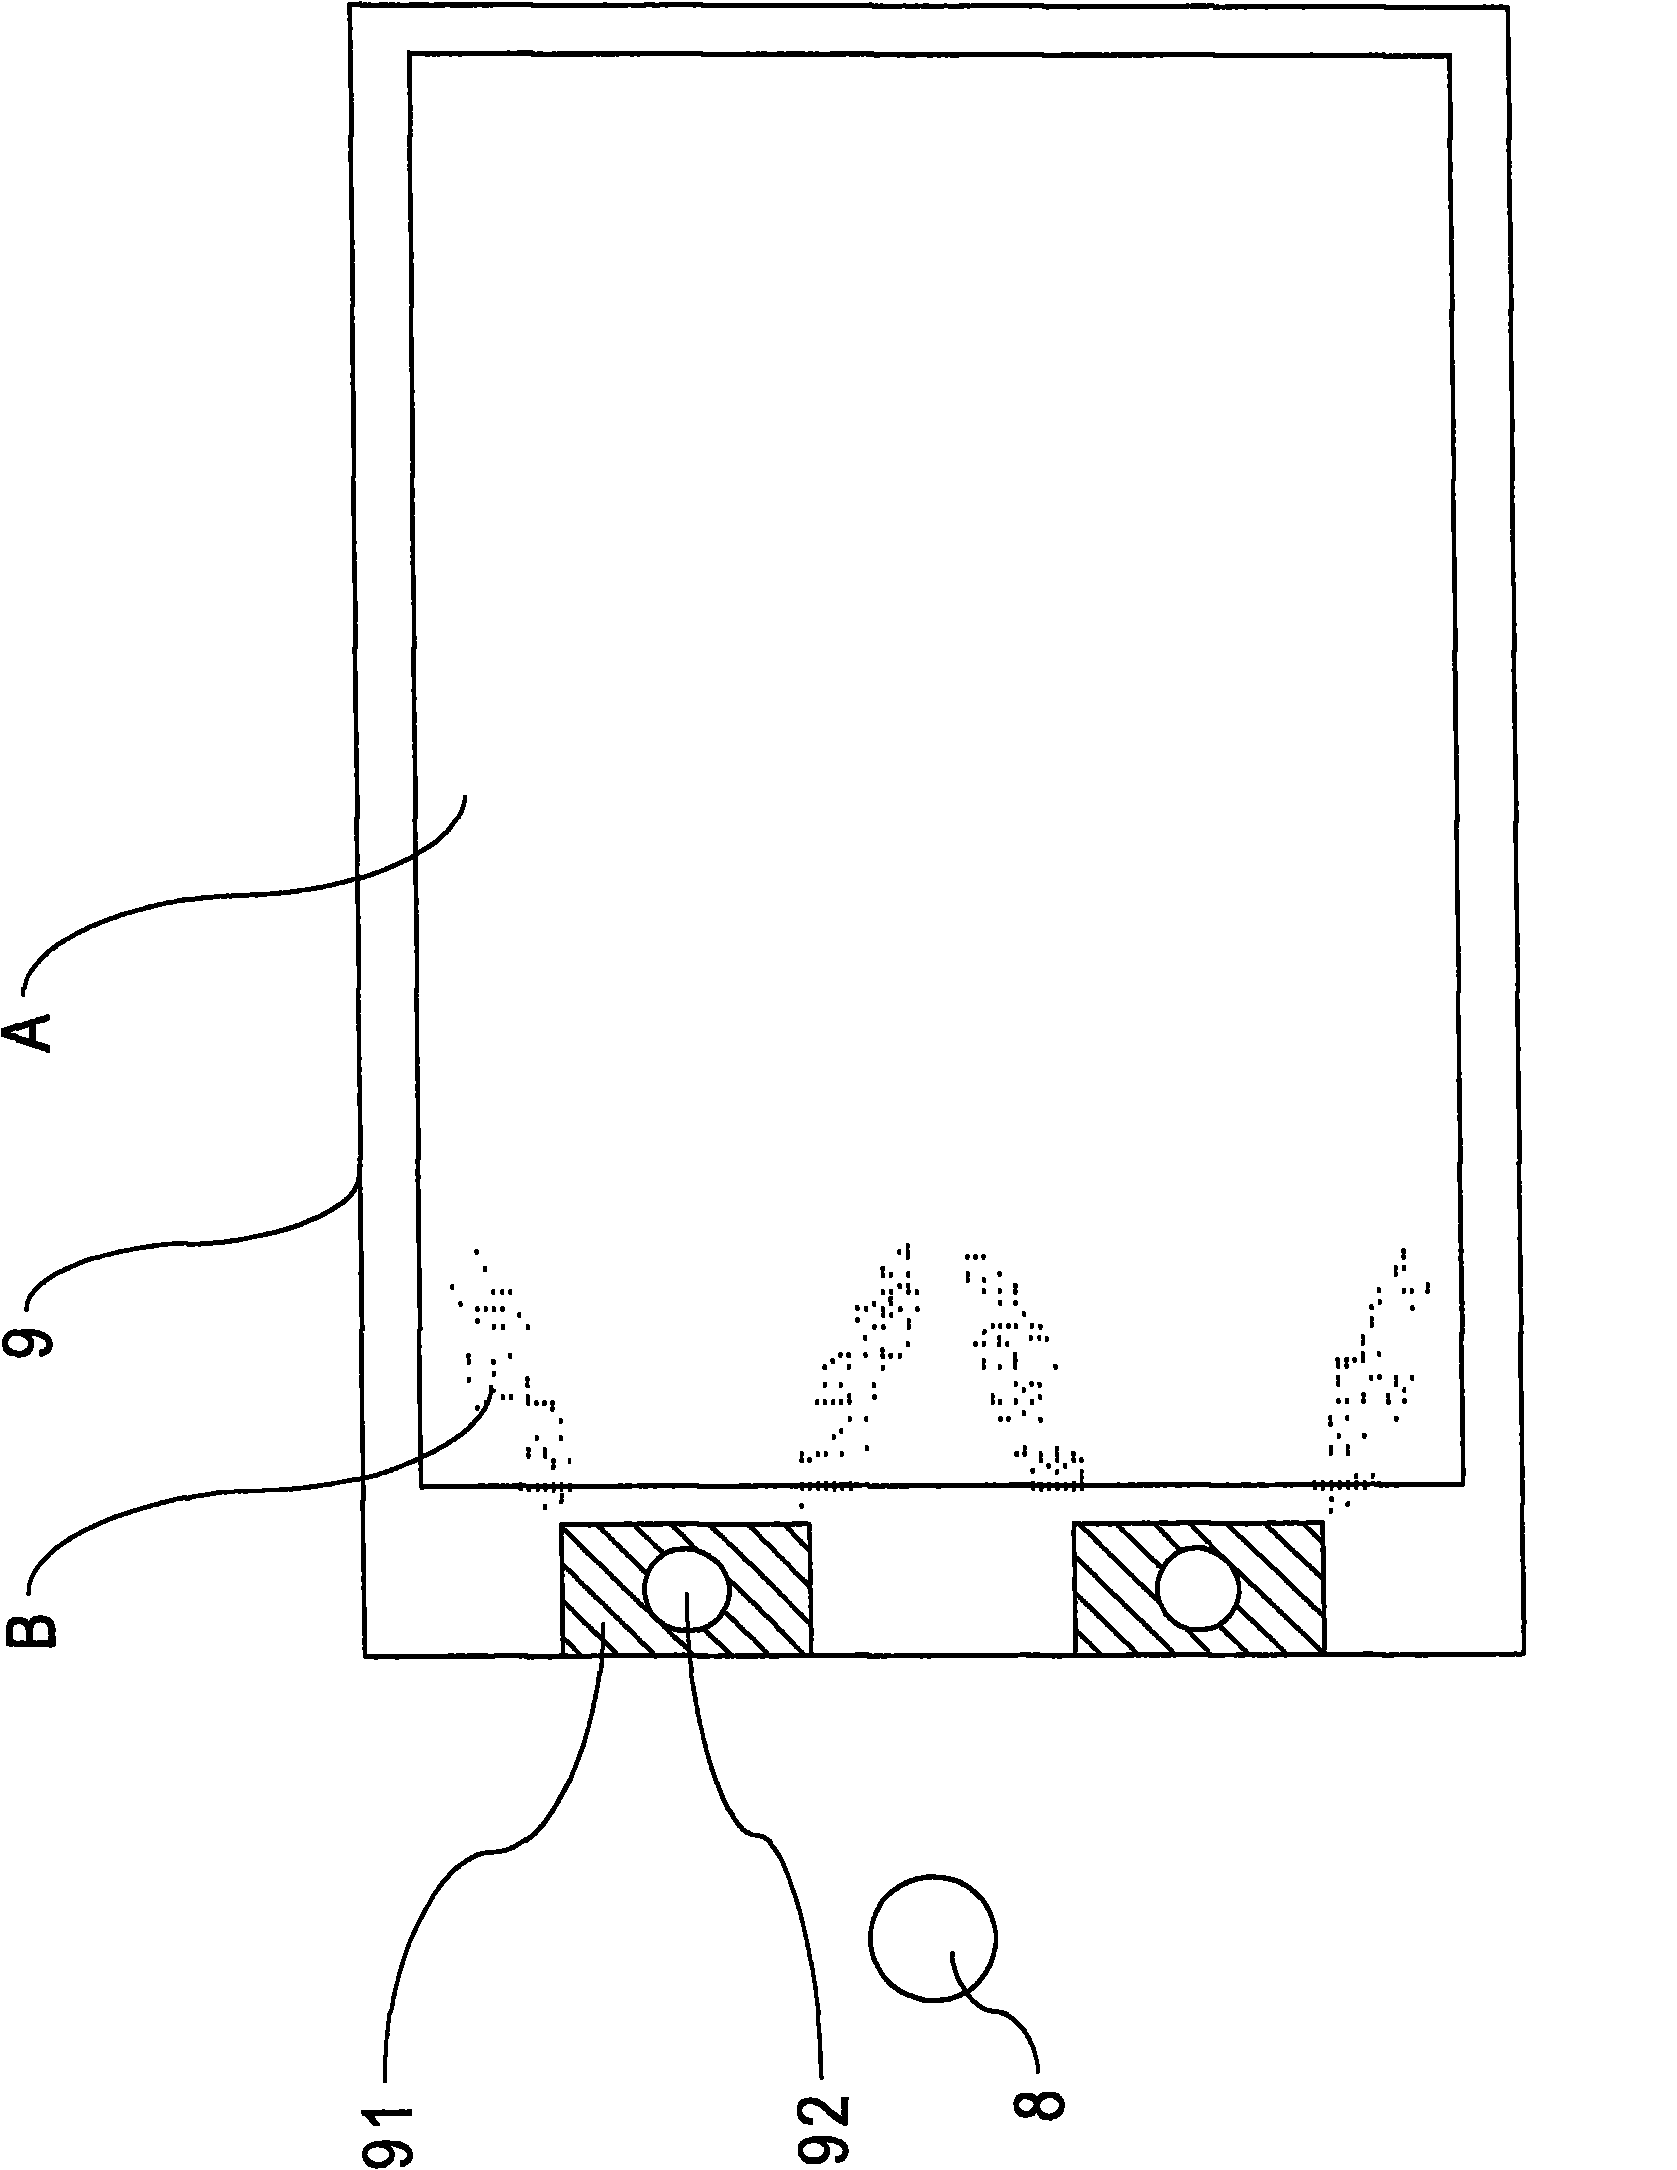 Backlight device of display